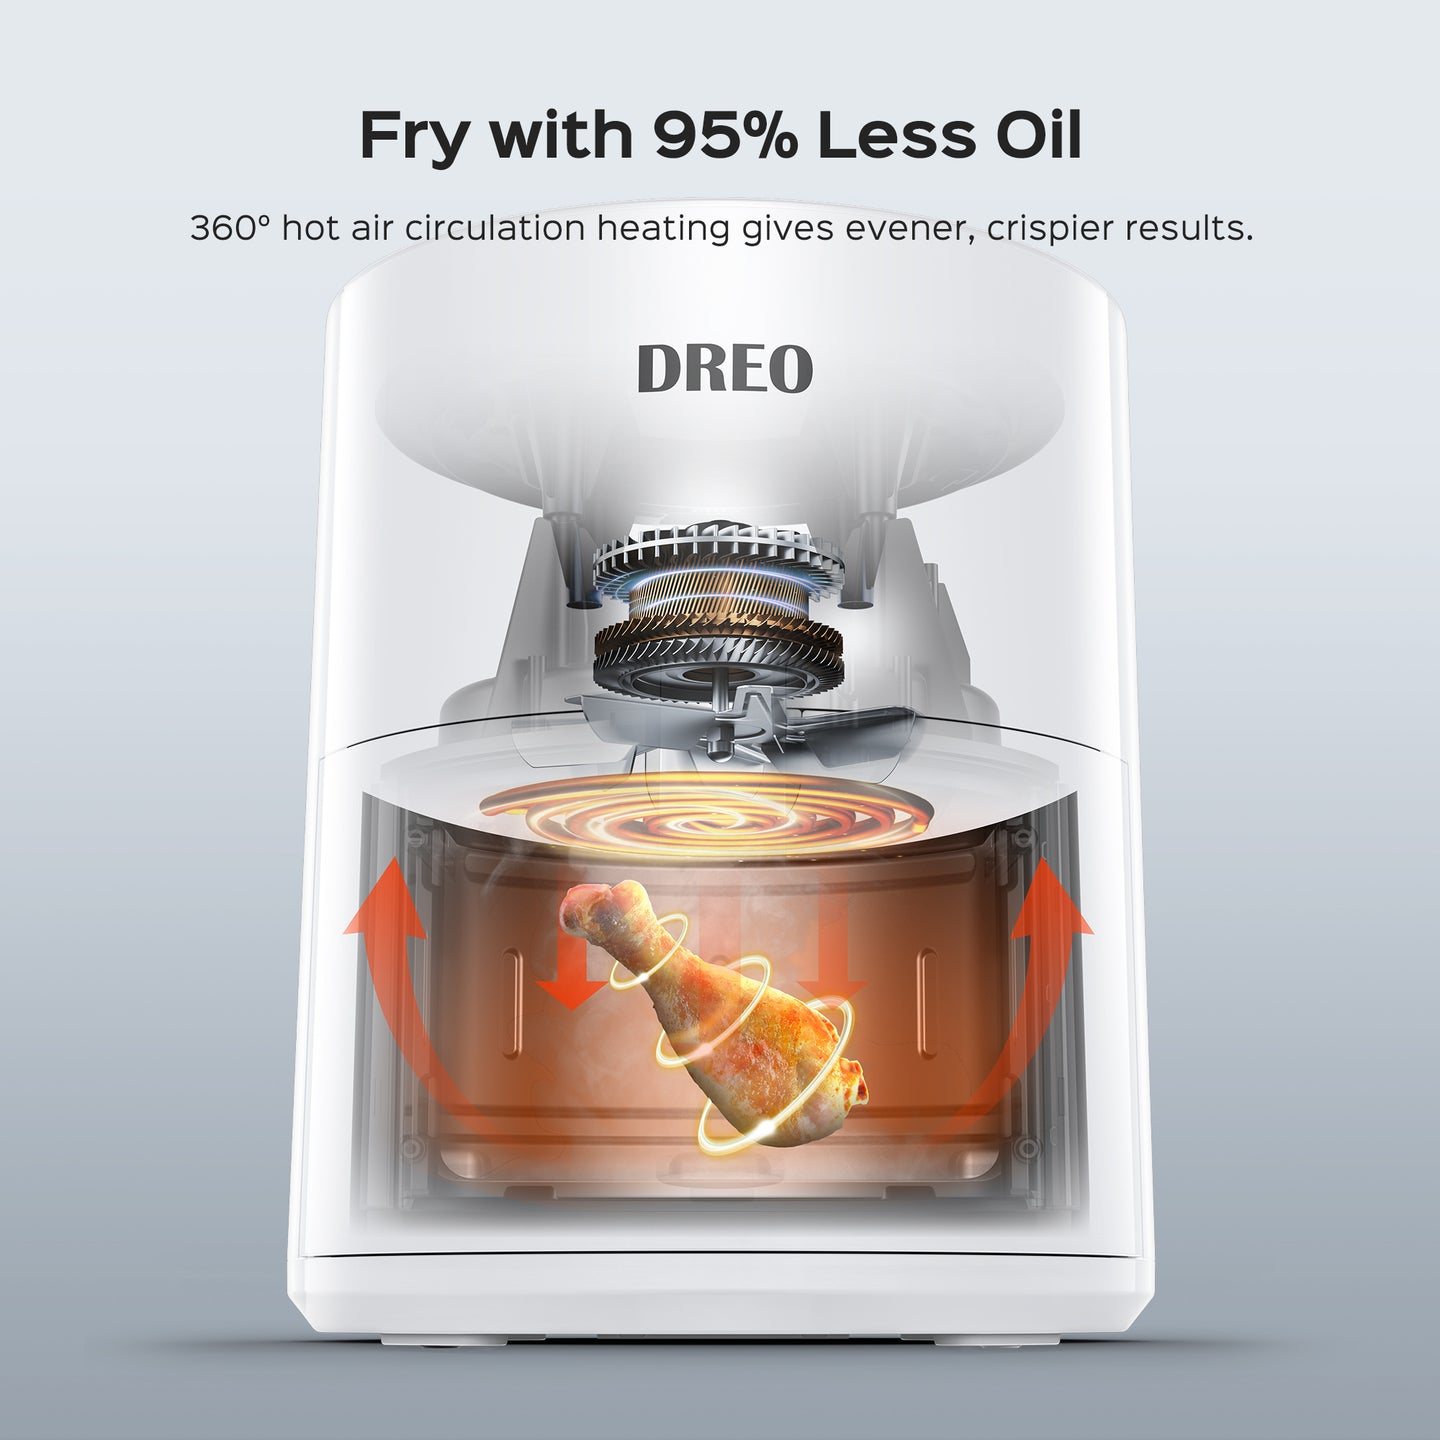 DREO ChefMaker As A Healthier Alternative In Cooking